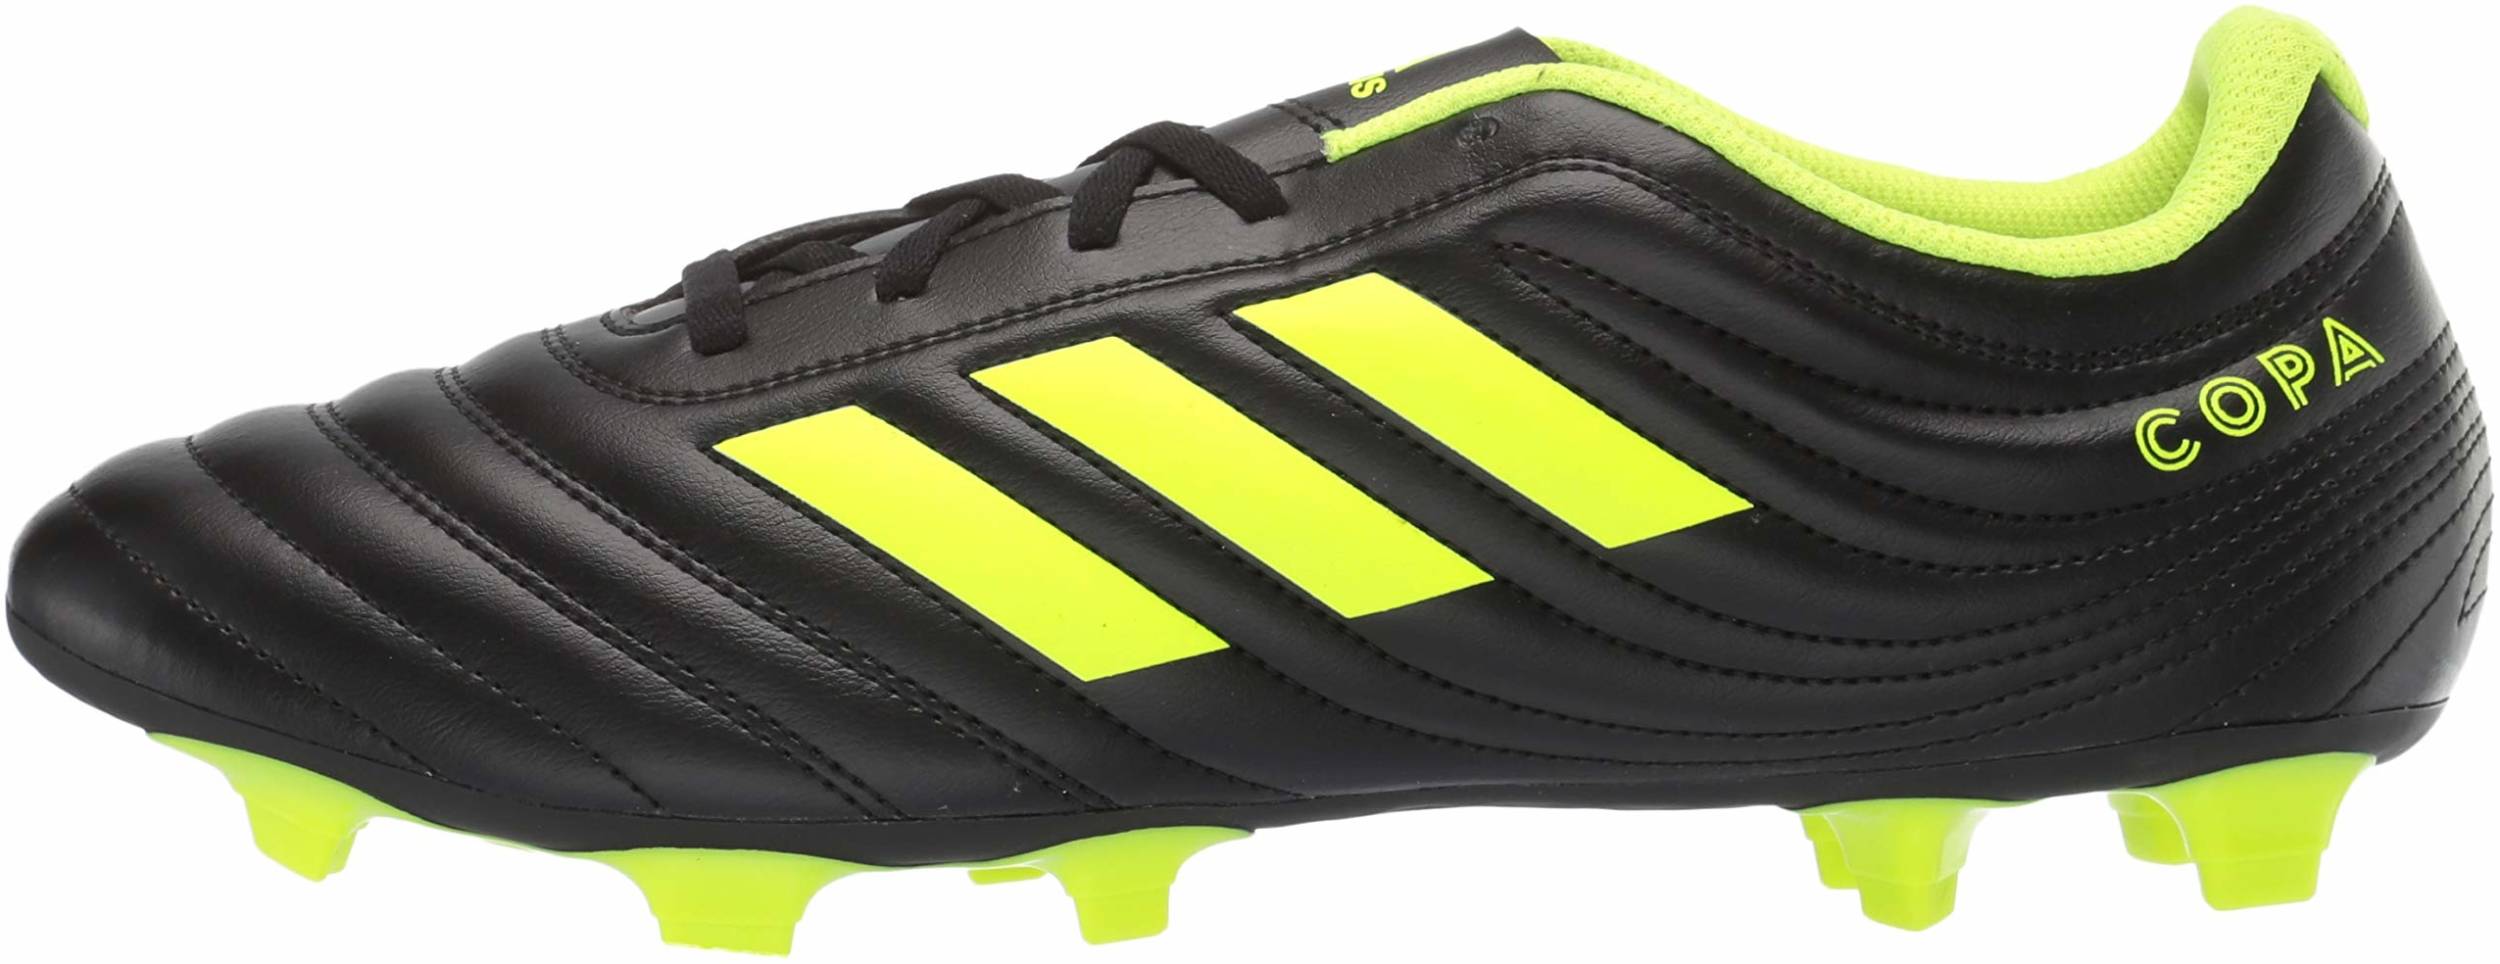 Wanneer Vertrouwen op vinger Adidas Copa 19.4 Firm Ground Review, Facts, Comparison | RunRepeat